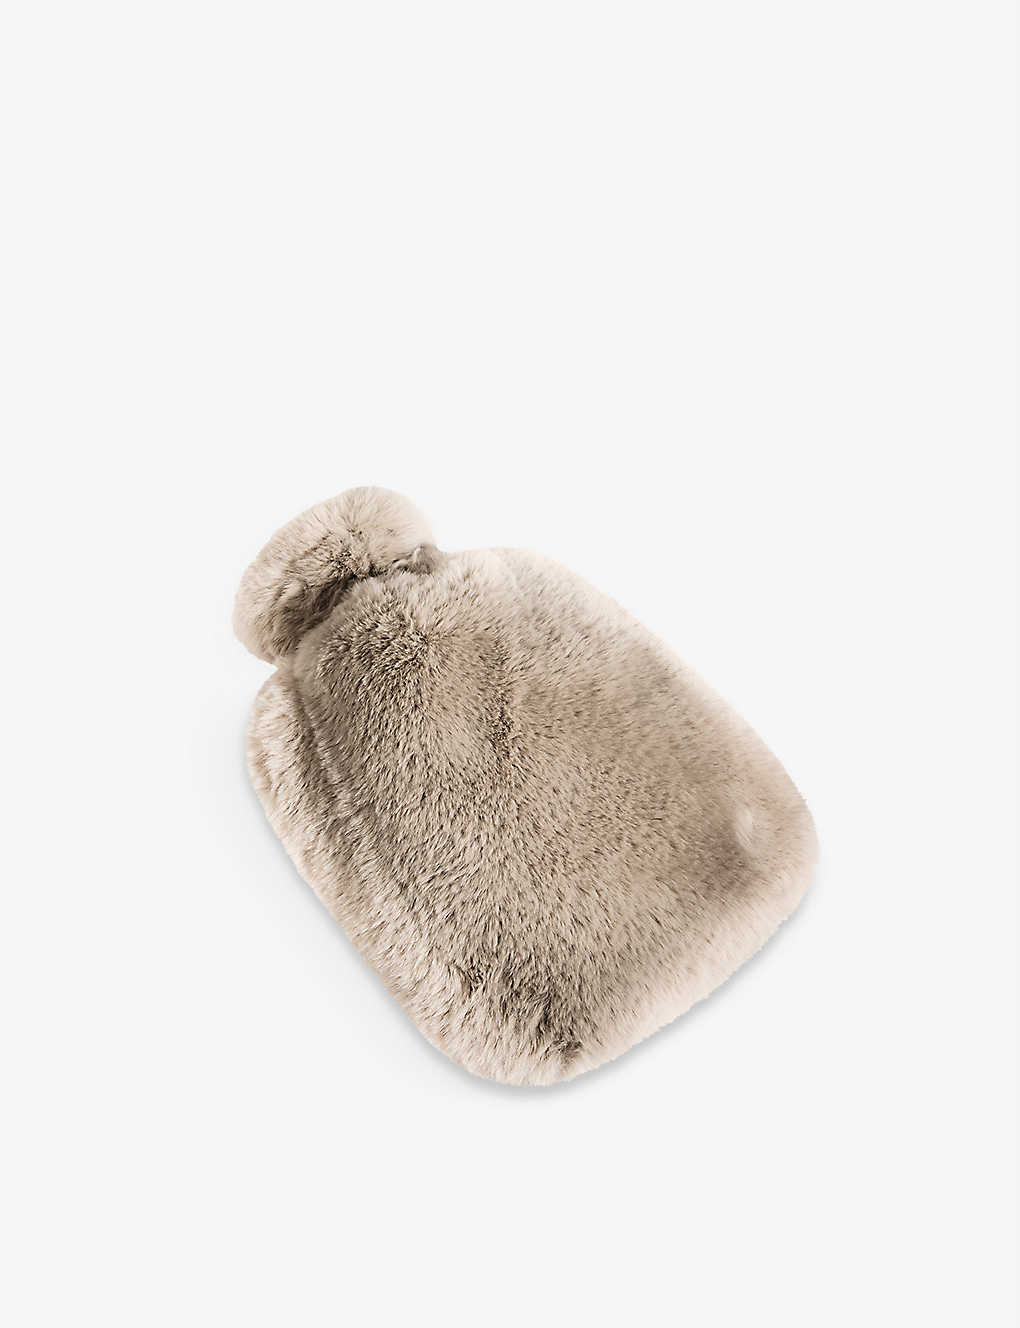 THE WHITE COMPANY スーパーソフト フェイクファー ホットウォーターボトル Super-soft faux-fur hot water bottle NATURAL